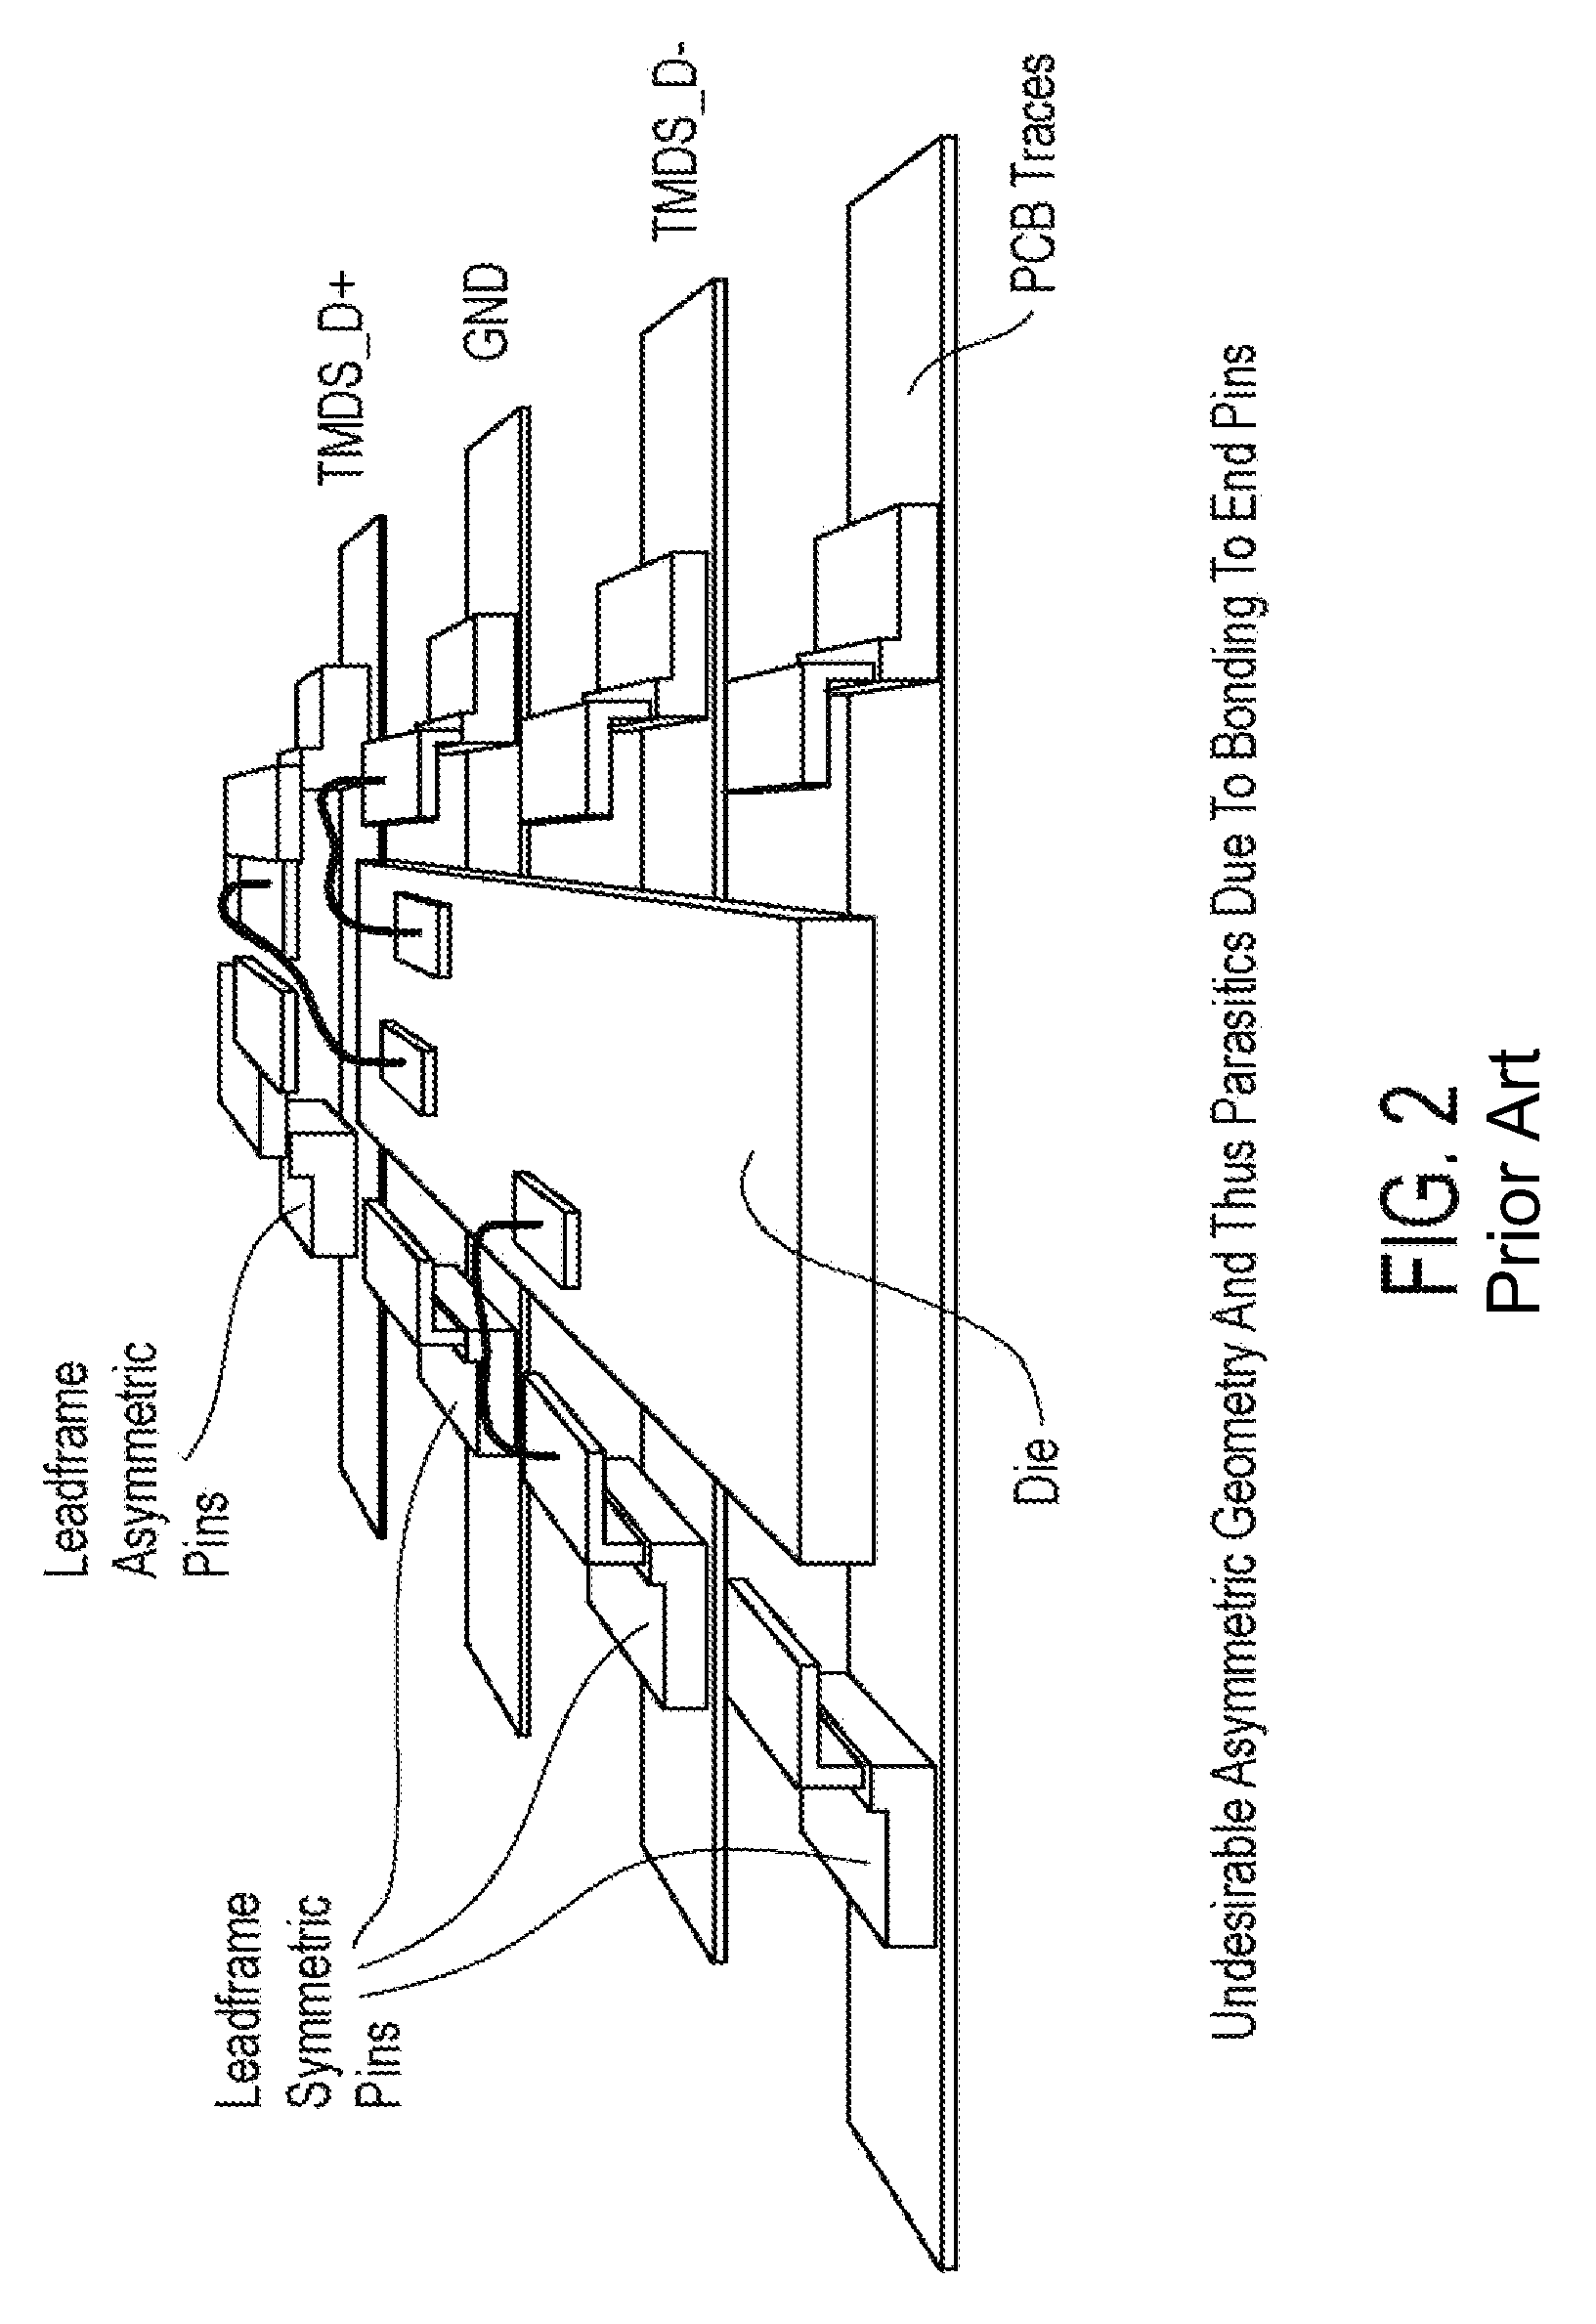 Method and apparatus that provides differential connections with improved ESD protection and routing